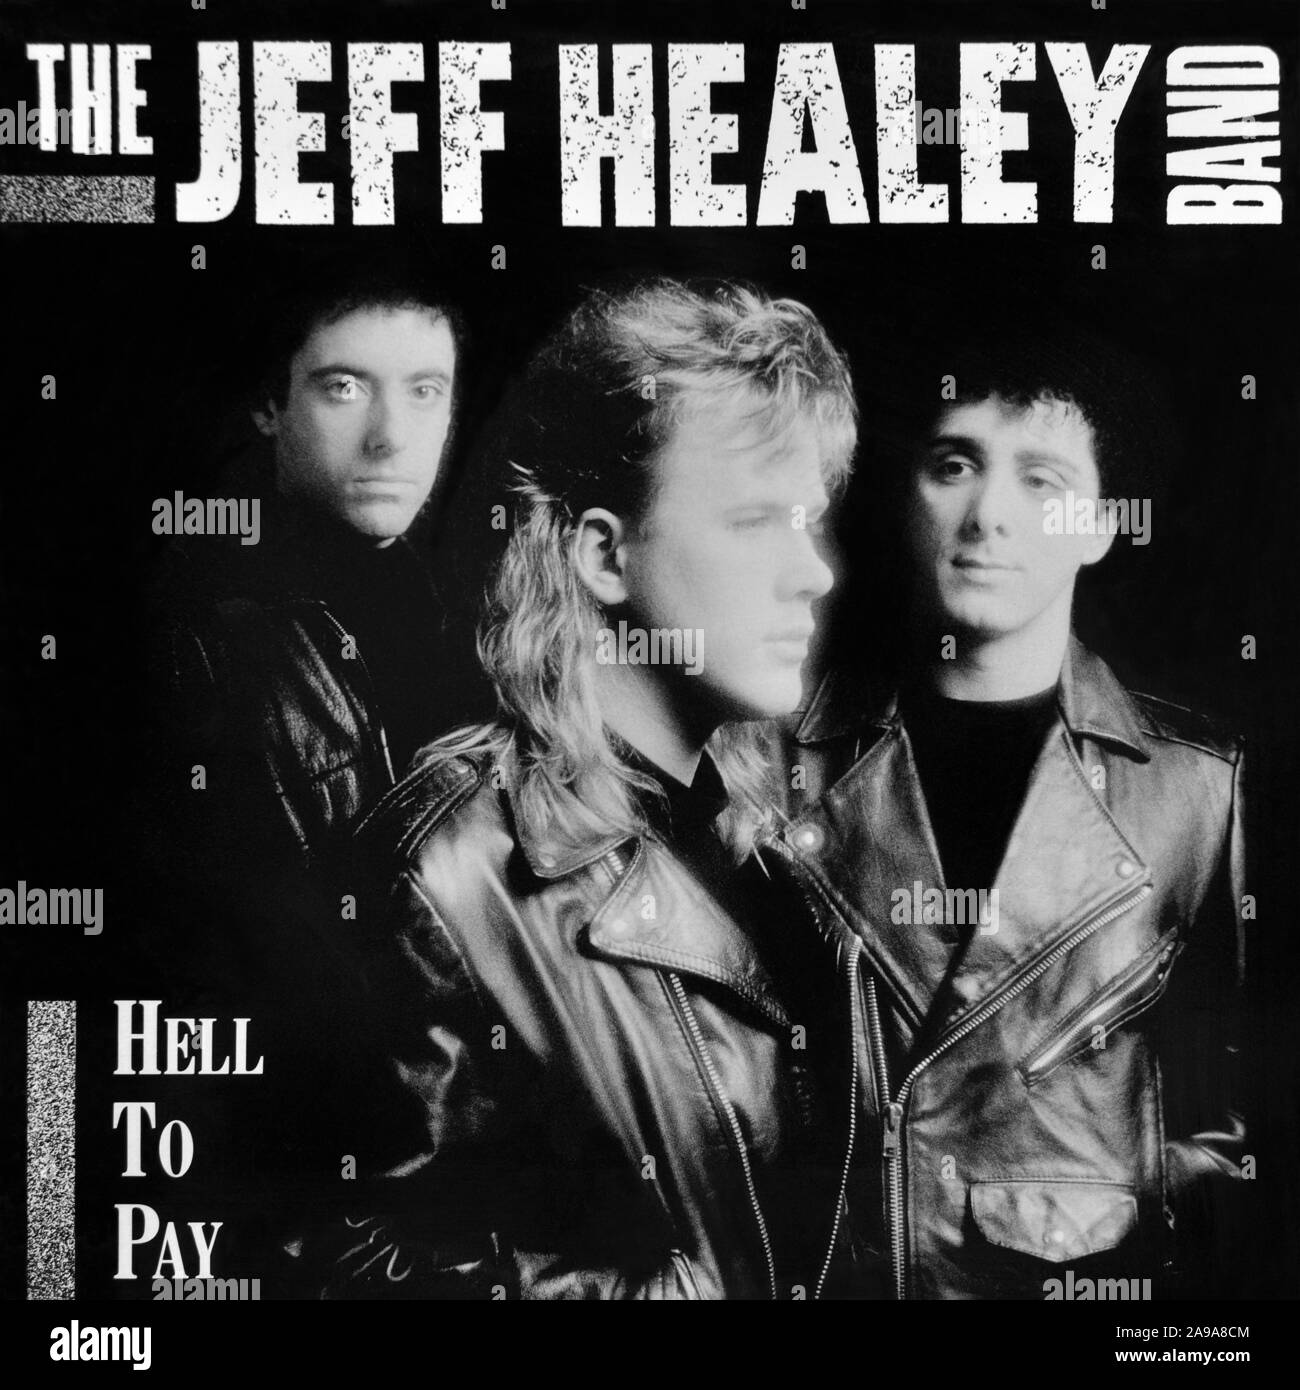 The Jeff Healey Band - original Vinyl Album Cover - Hell To Pay - 1990 Stockfoto